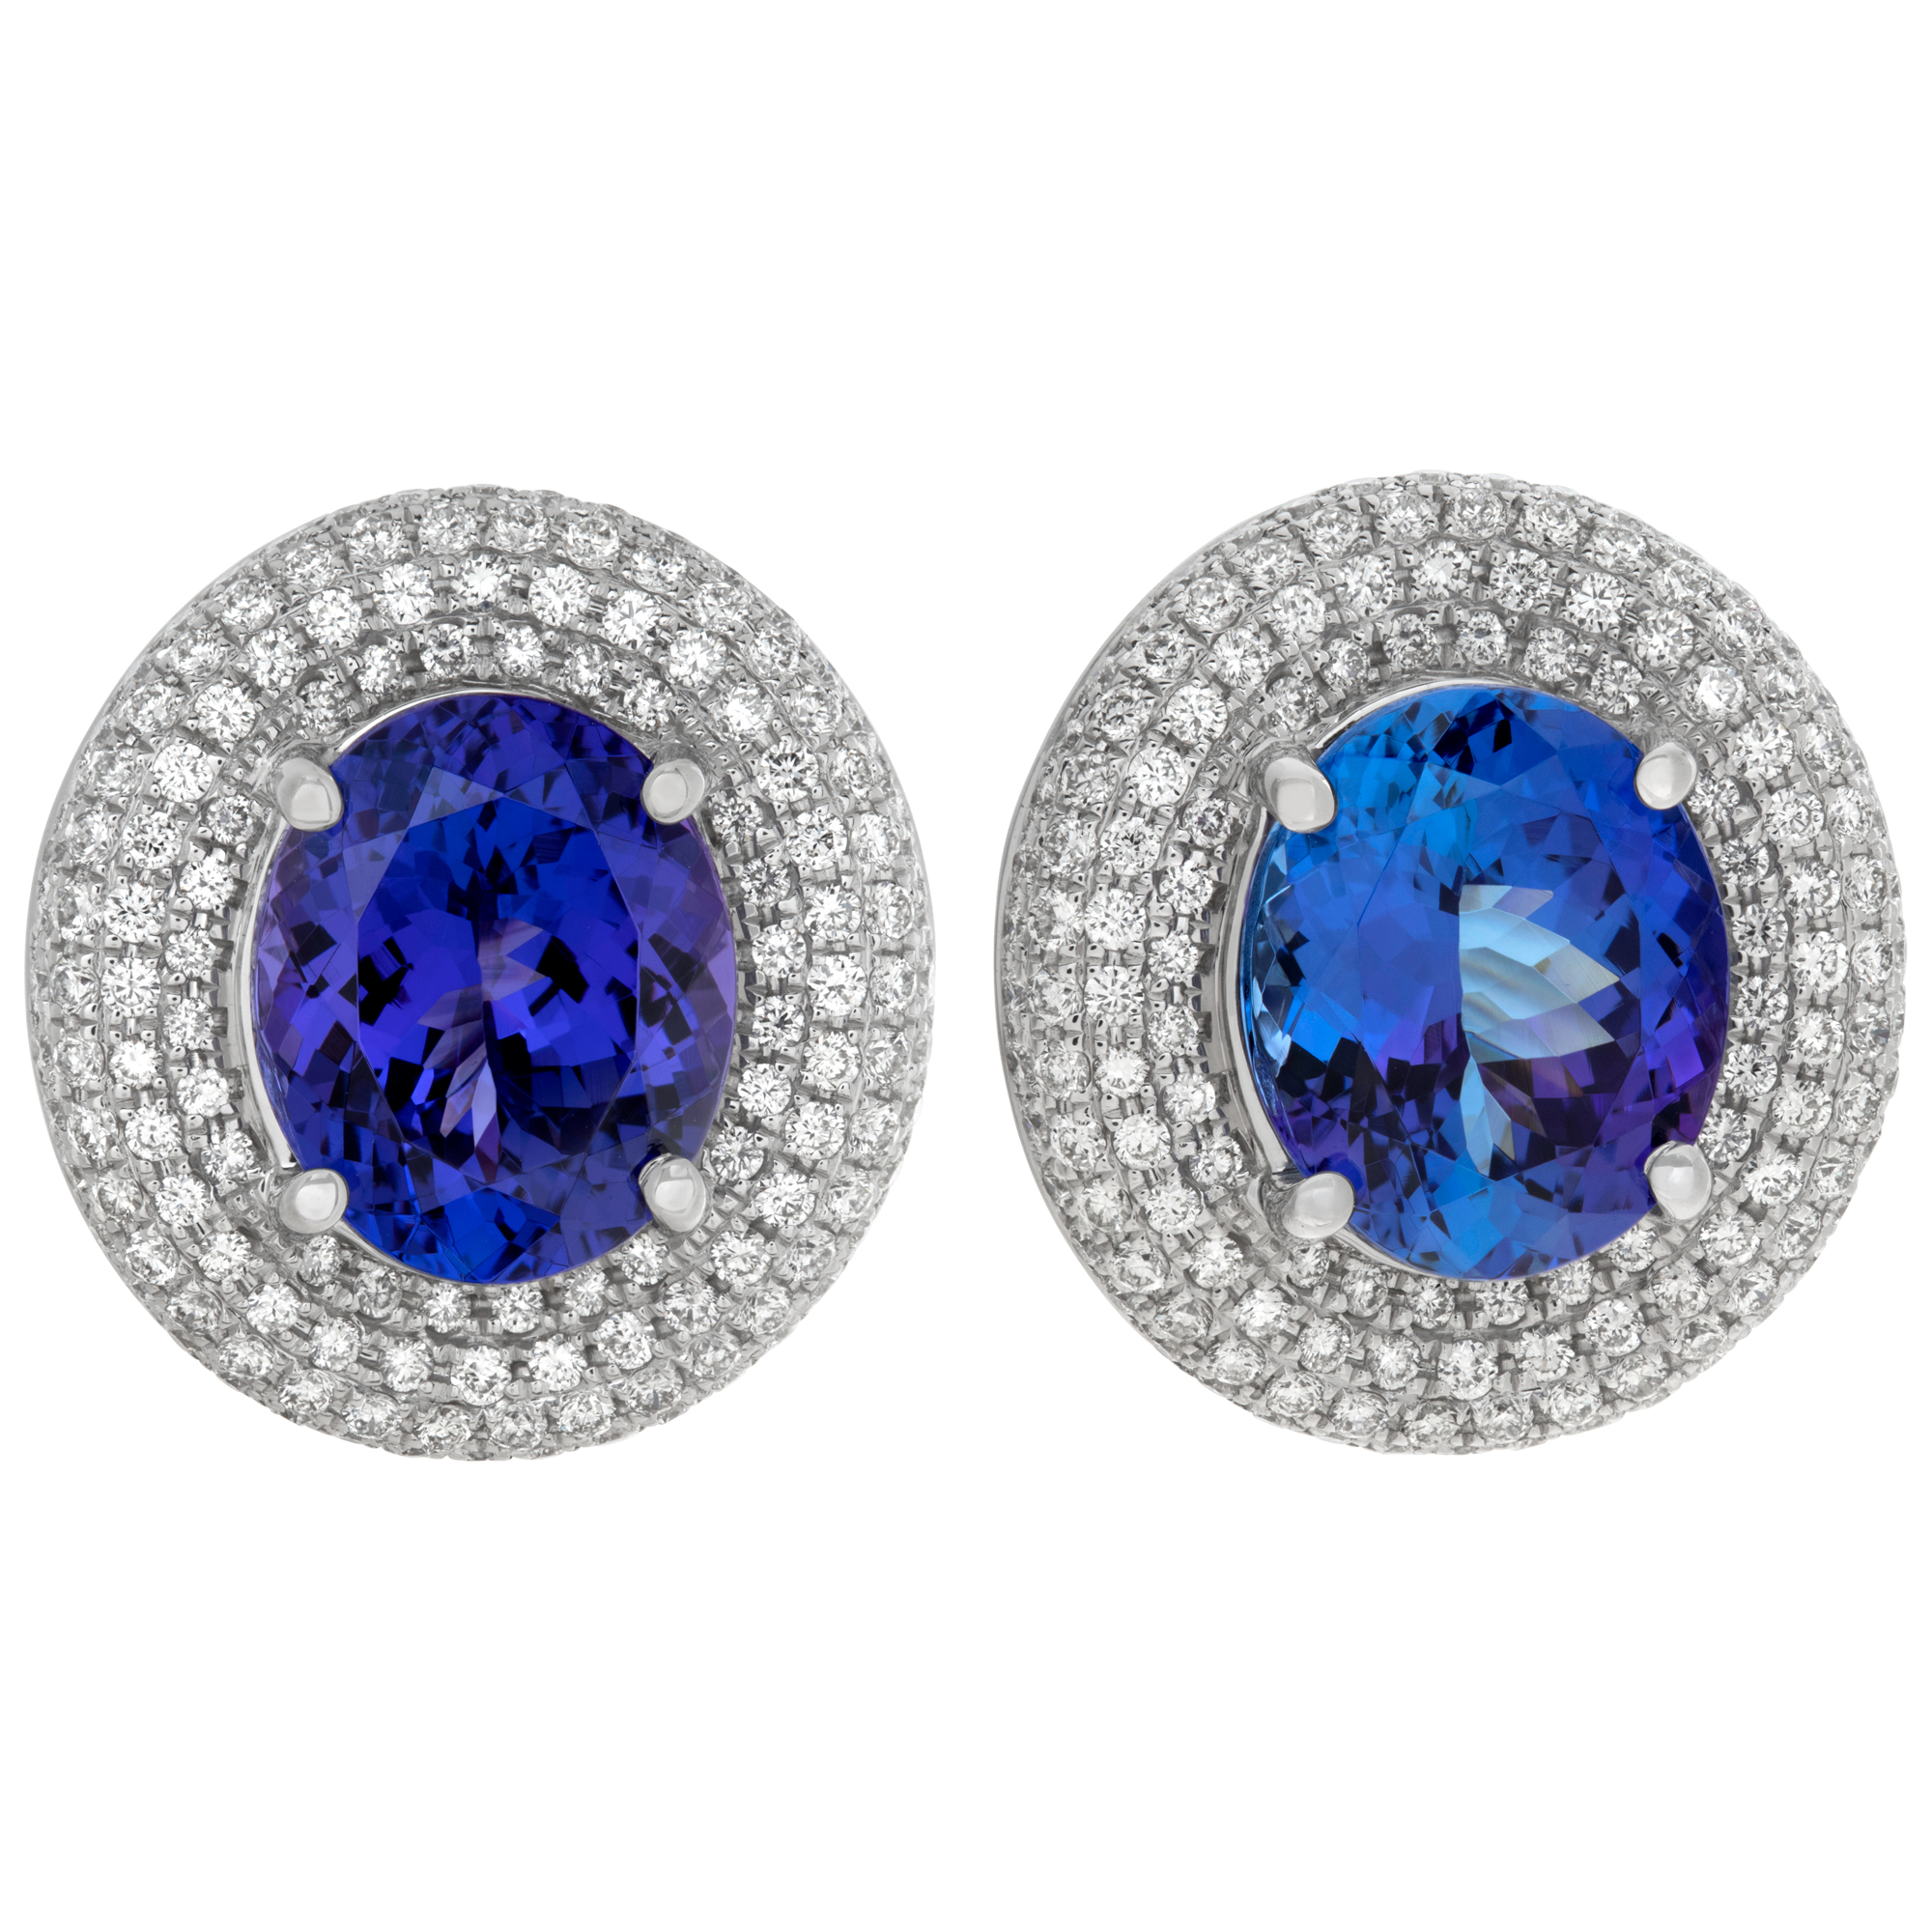 Tanzanite and Diamond earrings with 1.19 carats in diamonds and 7.15 carats in tanzanite. image 1